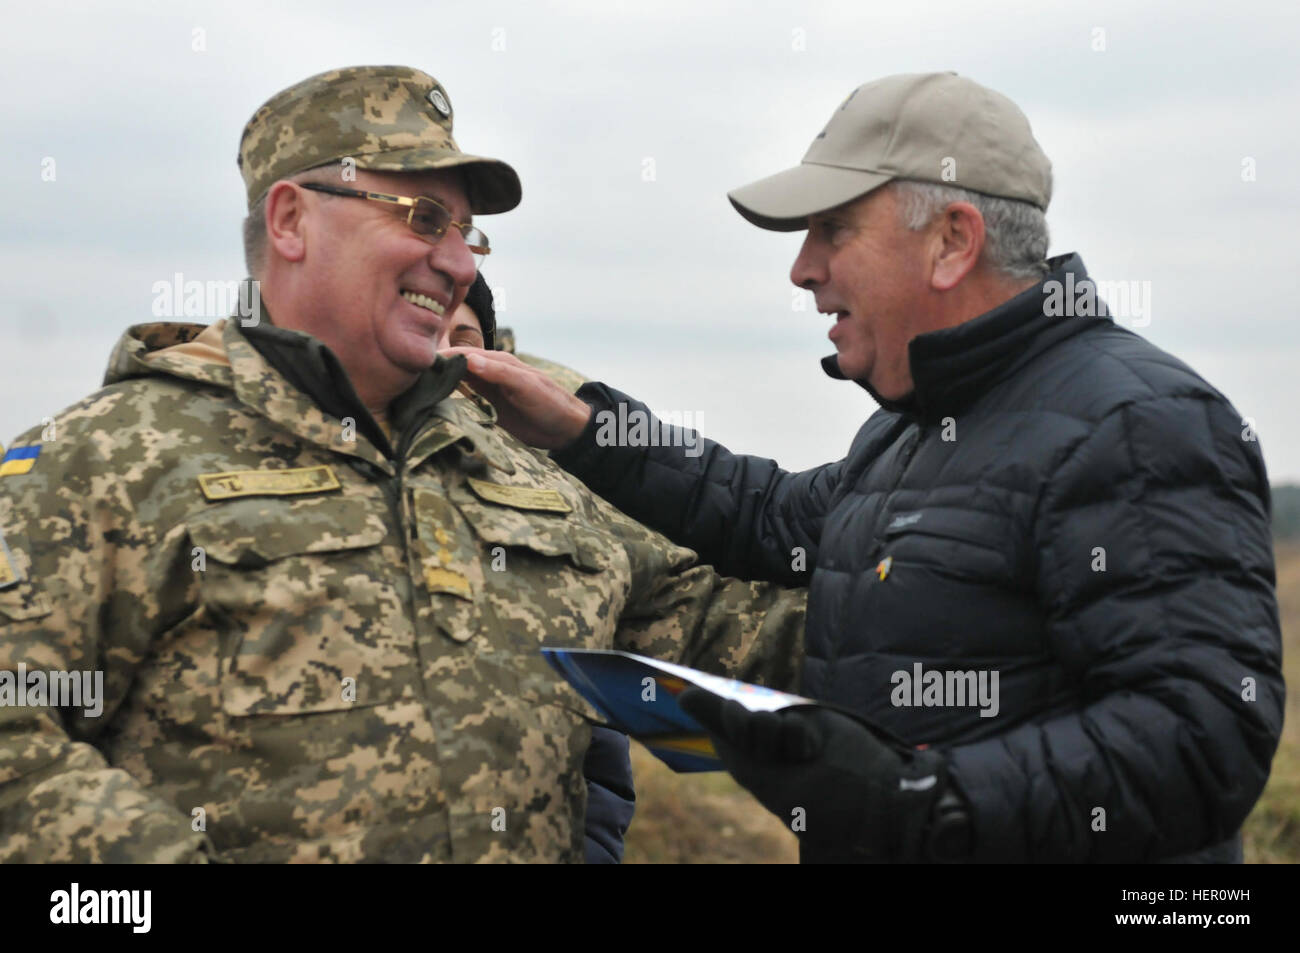 YAVORIV, Ukraine--Army retired General John Abizaid, advisor to Ukraine's Defense Minister speaks with Lt. Gen. Pavlo Tkachuk, commander of Ukraine's Land Forces Academy during a tour of the ranges at the International Peacekeeping and Security Center, Nov.11. Abizaid was recently appointed advisor to Ukrainian Defense Minister Stepan Poltorak by Secretary of Defense Ash Carter. JMTG-U’s mission is part of ongoing efforts to contribute to Ukraine's long-term military reform and professionalism and to help improve the country's internal defense capabilities and training capacity. (Army photo by Stock Photo